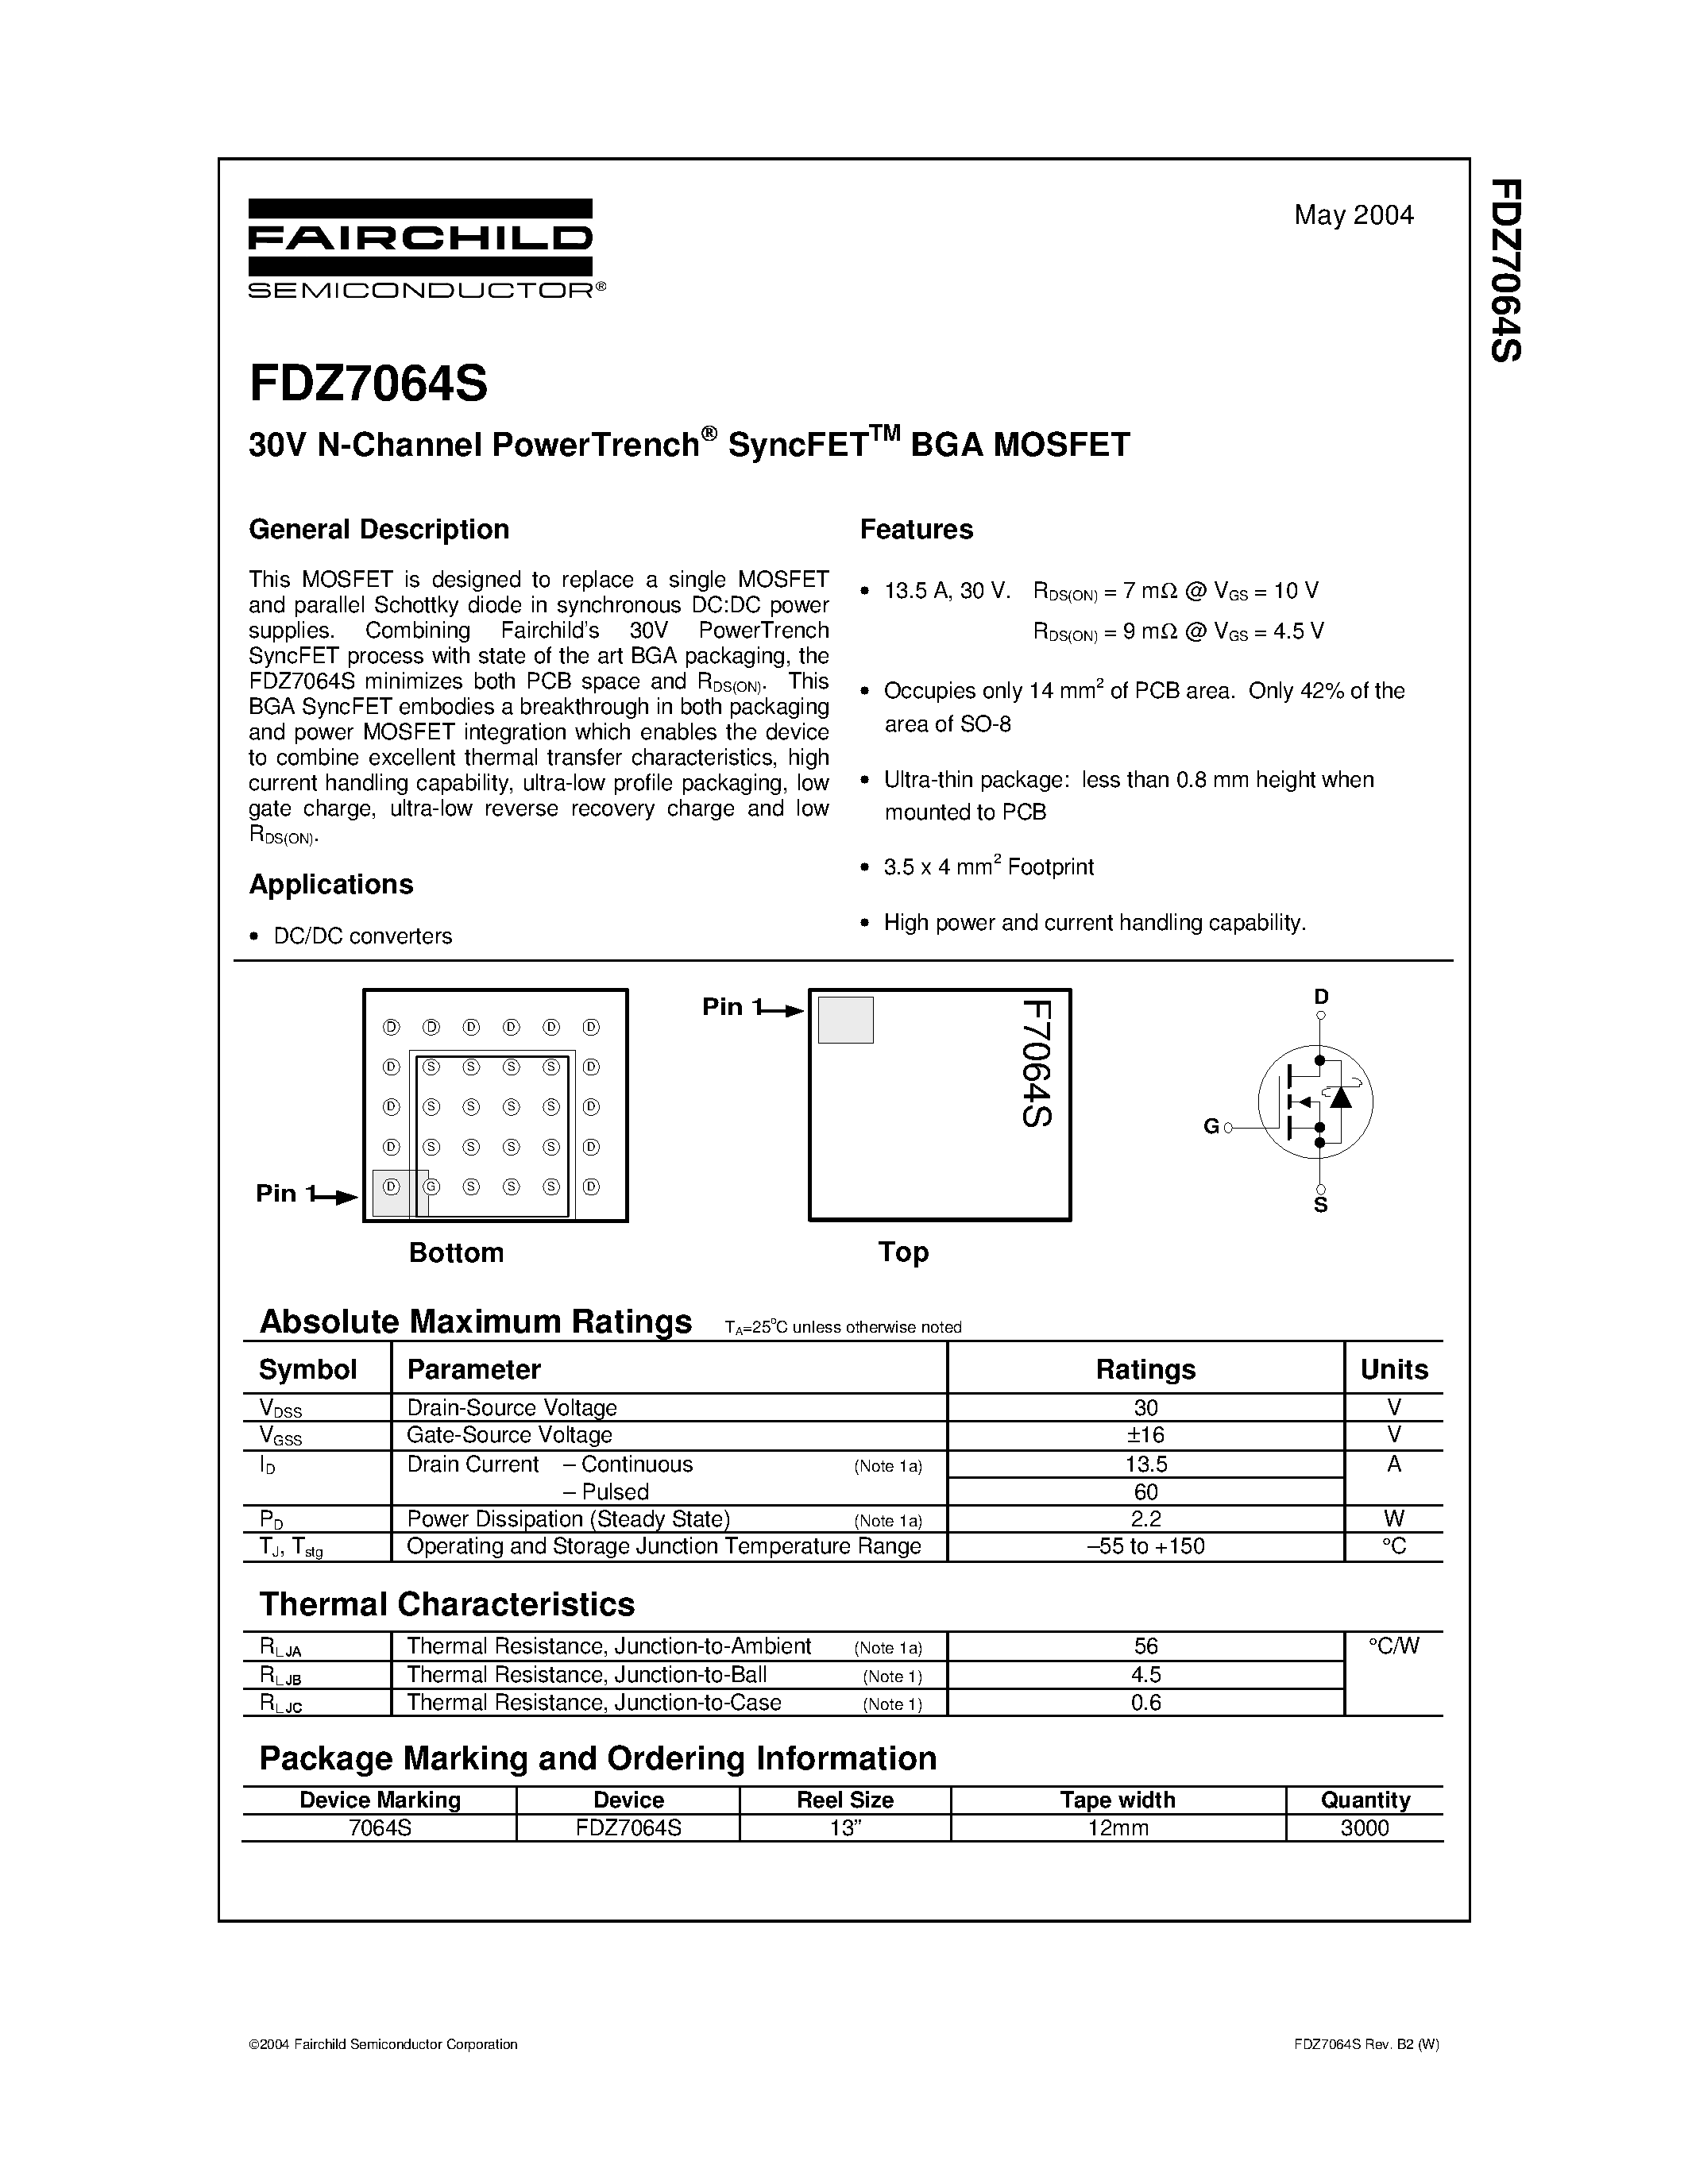 Datasheet FDZ7064S - 30V N-Channel PowerTrench SyncFET BGA MOSFET page 1